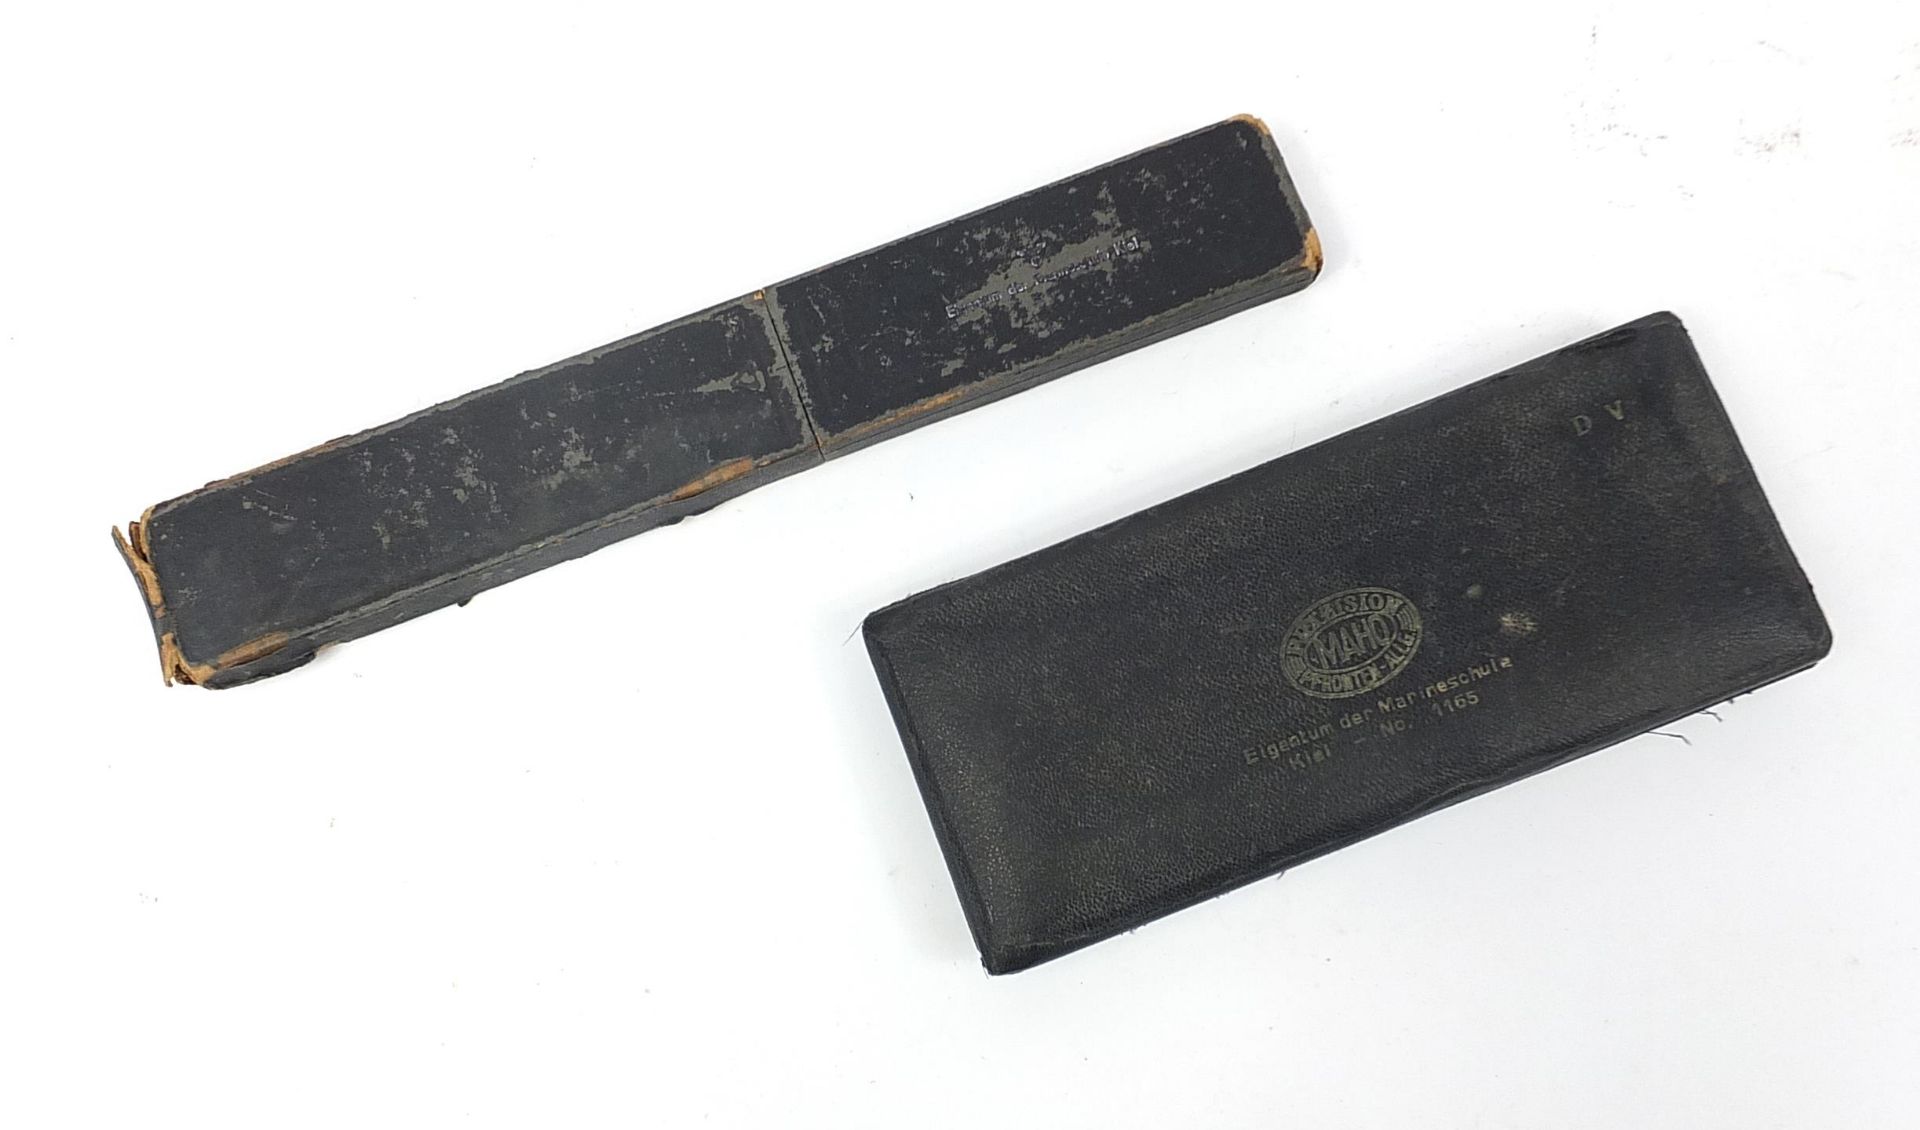 German military interest drawing set and slide rule with case from Eigentum der Marineschule, - Image 2 of 5